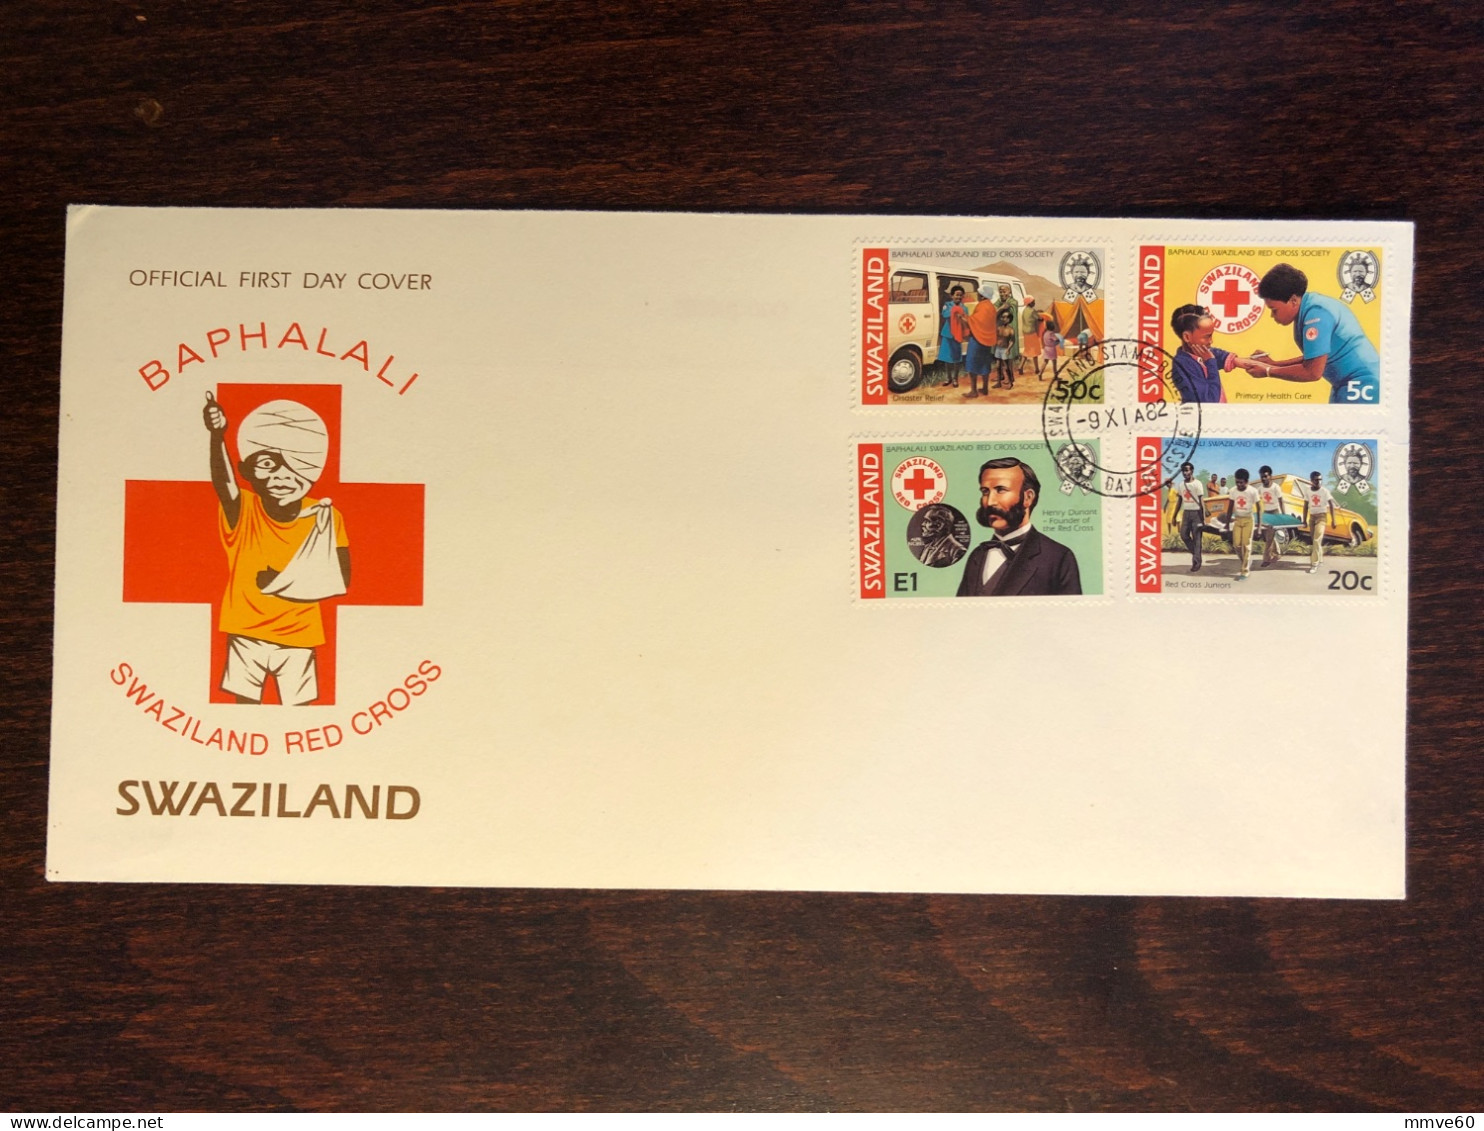 SWAZILAND FDC COVER 1982 YEAR RED CROSS DUNANT HEALTH MEDICINE STAMPS - Swaziland (1968-...)